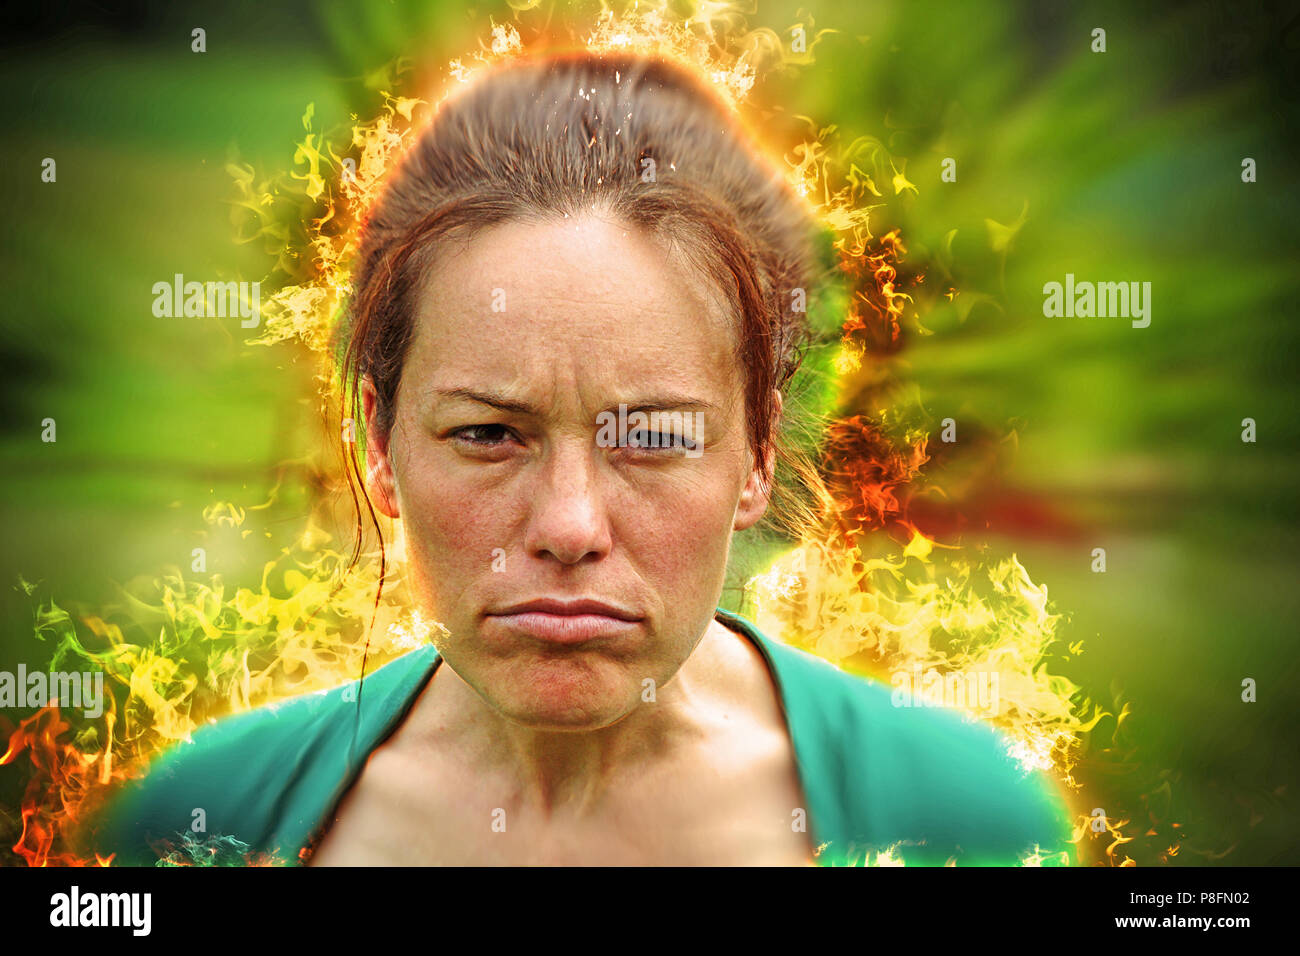 Very angry woman on fire Stock Photo